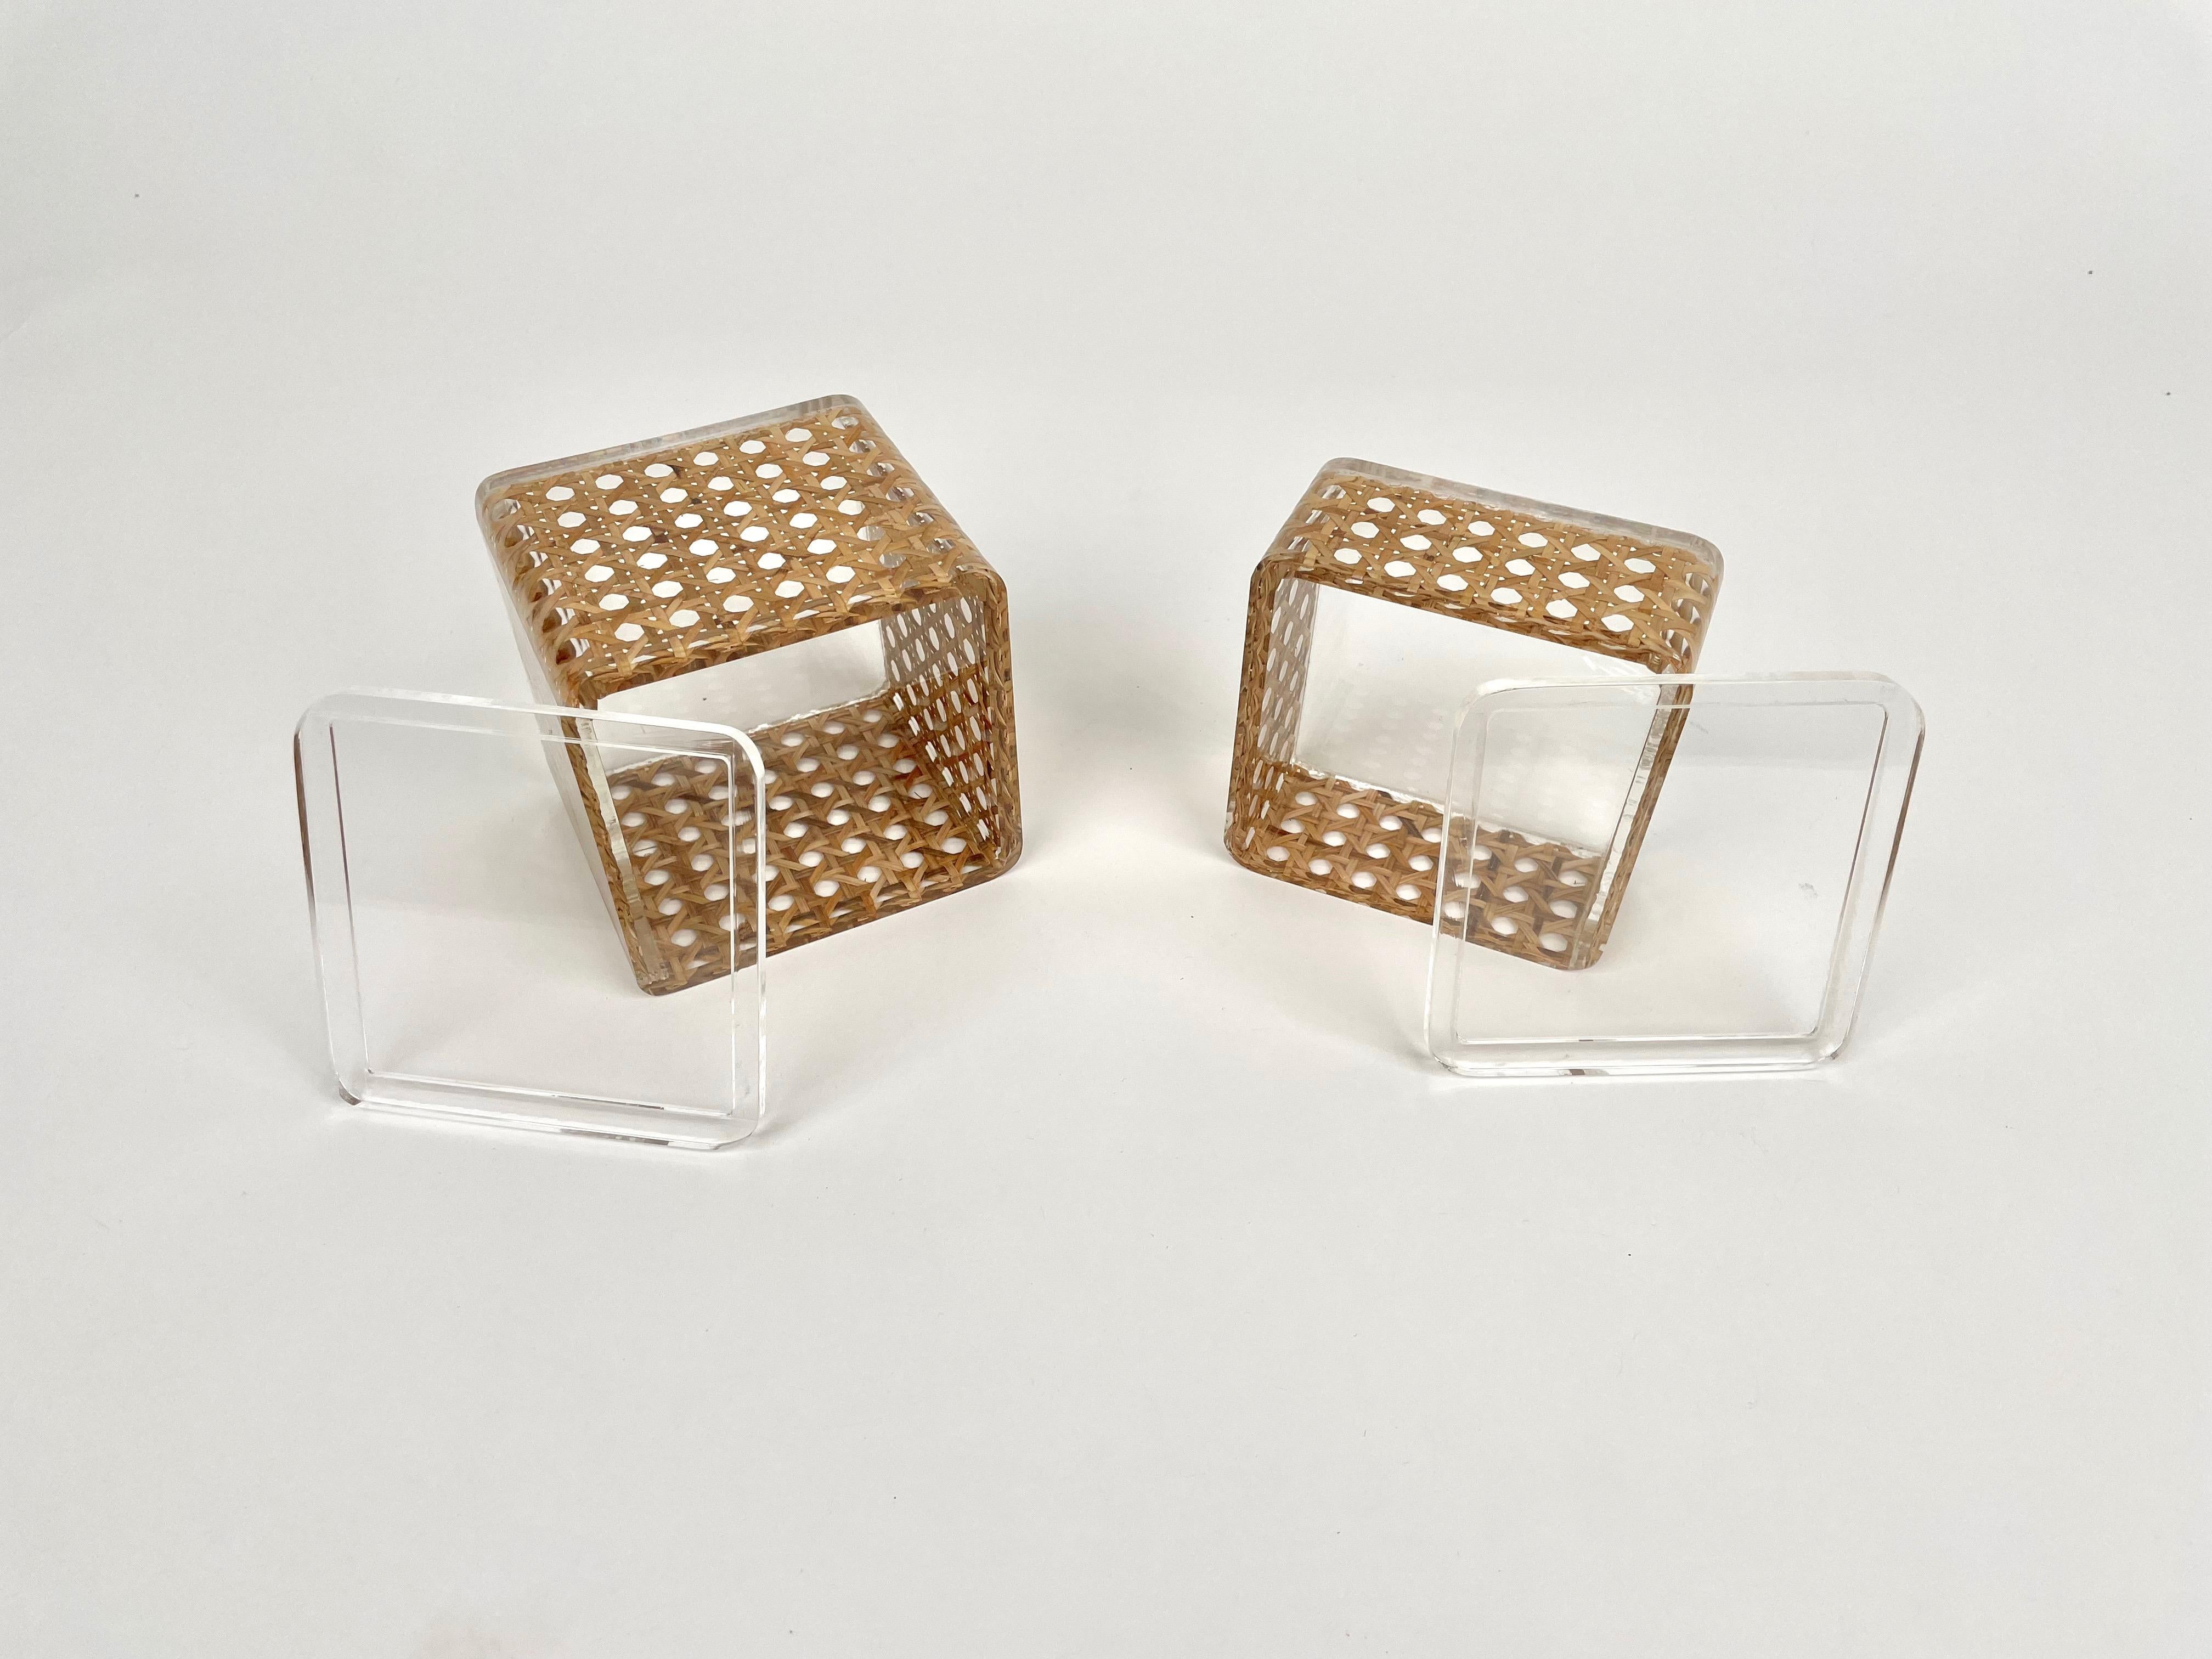 Pair of Box in Lucite & Rattan Christian Dior Home Style, Italy, 1970s For Sale 3